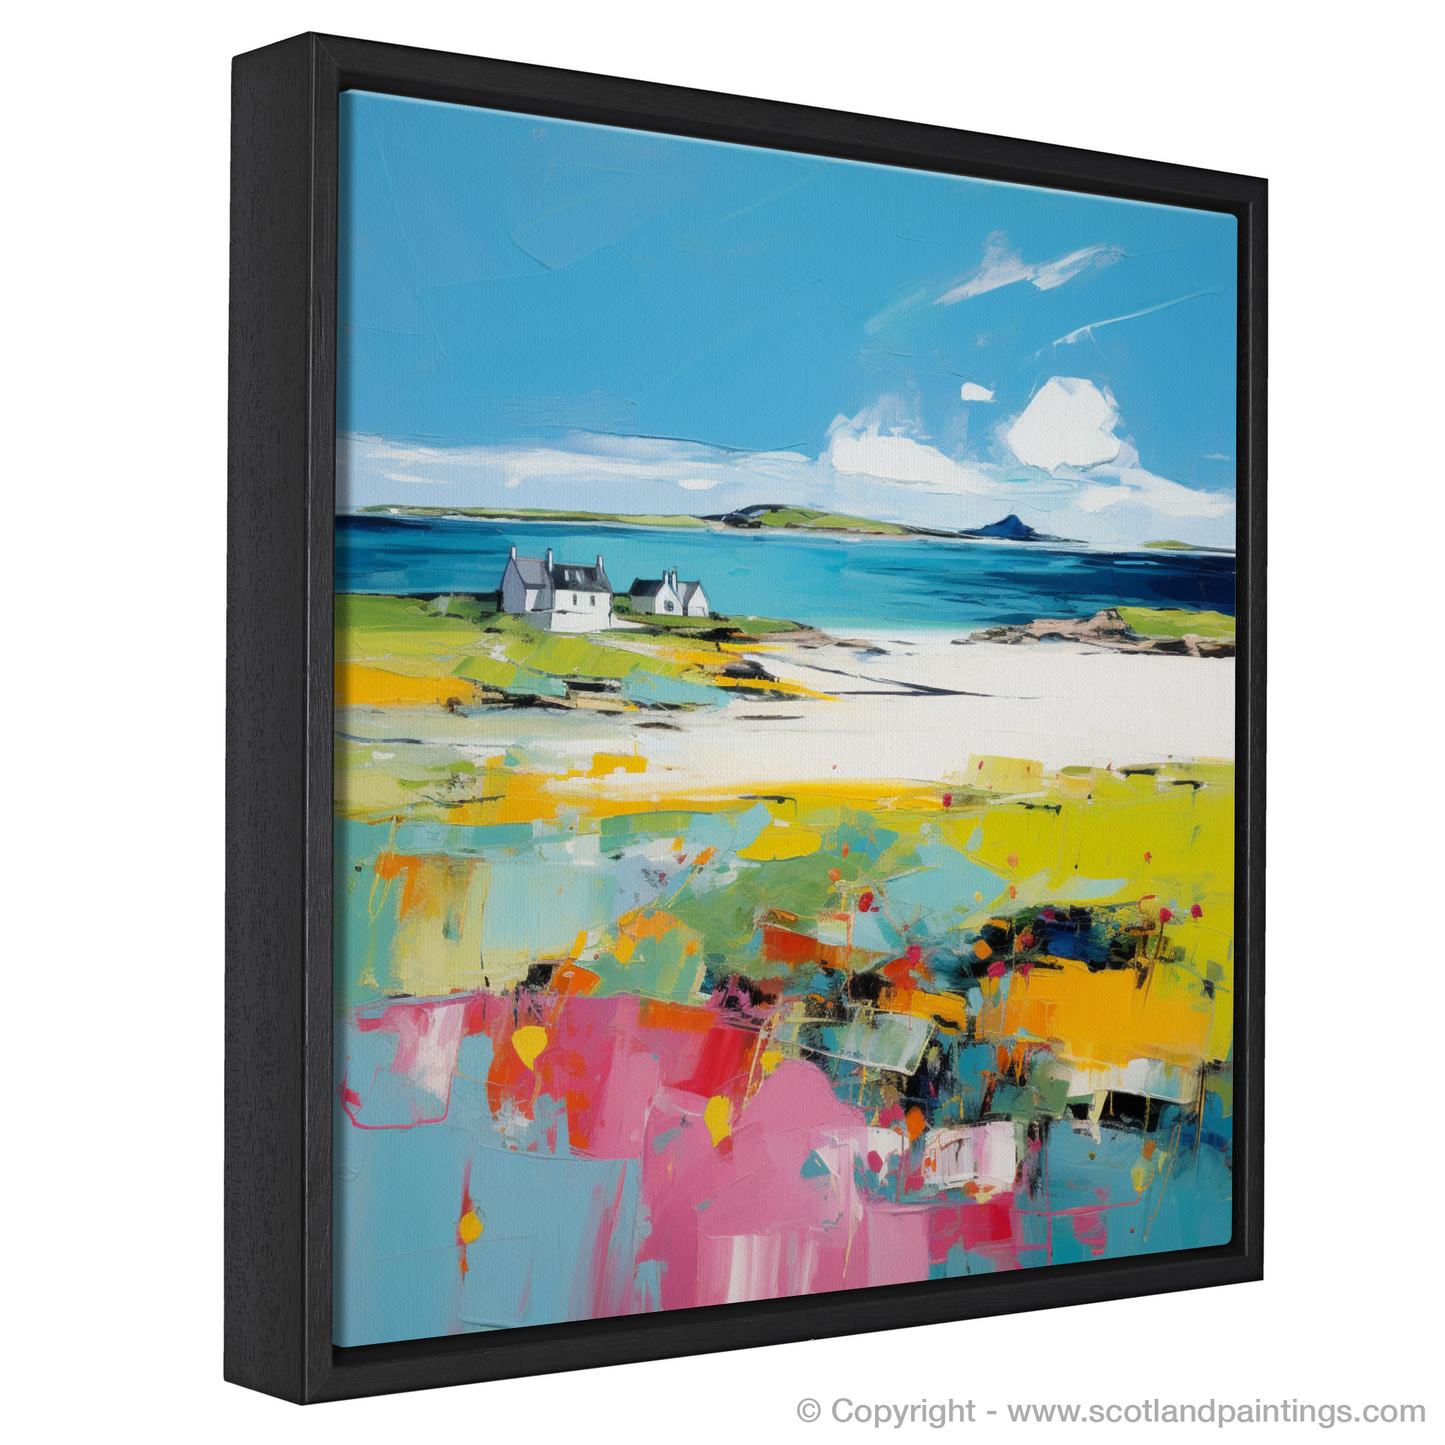 Painting and Art Print of Isle of Tiree, Inner Hebrides in summer entitled "Abstract Essence of Tiree Summer".